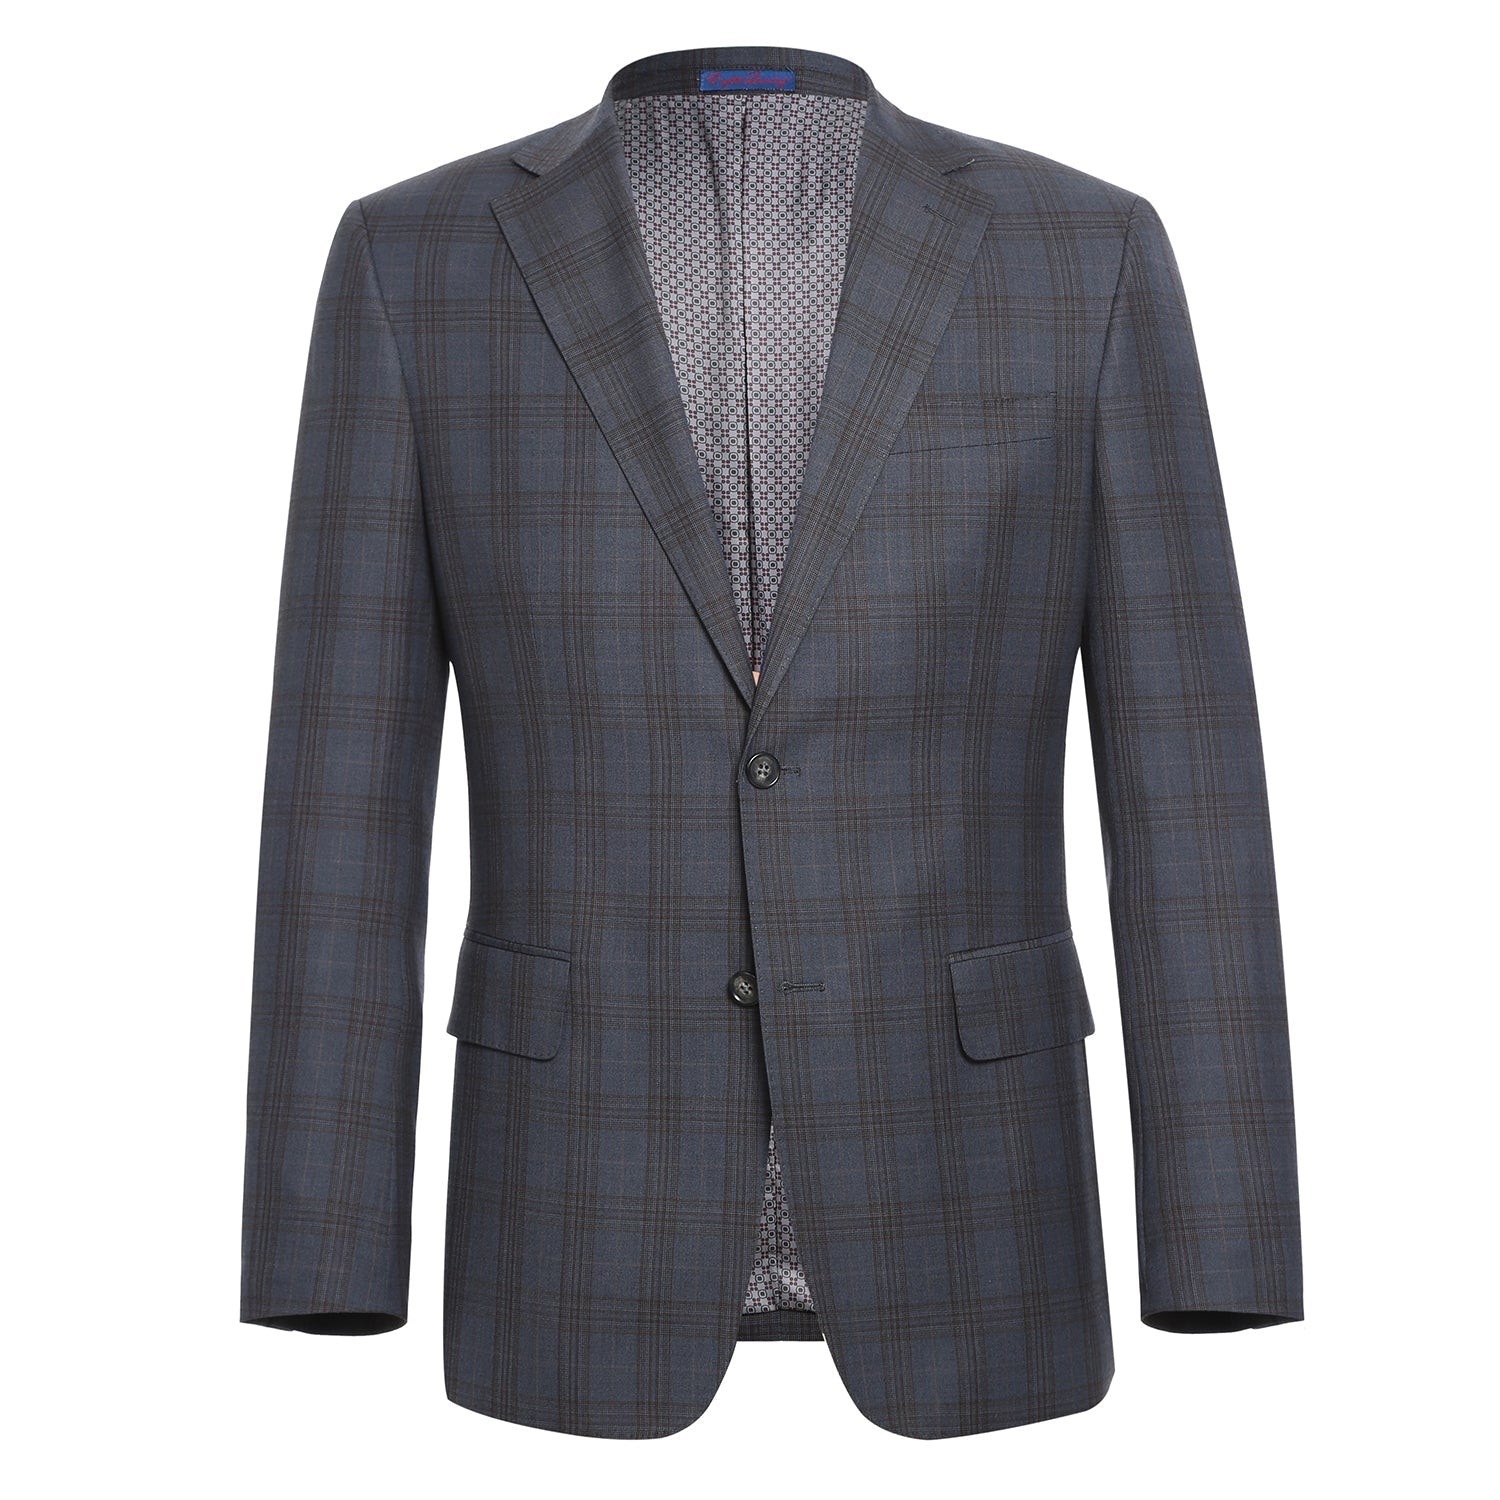 Stretch Performance Single Breasted SLIM FIT Suit in Grey and Tan Plaid (Short, Regular, and Long Available) by English Laundry